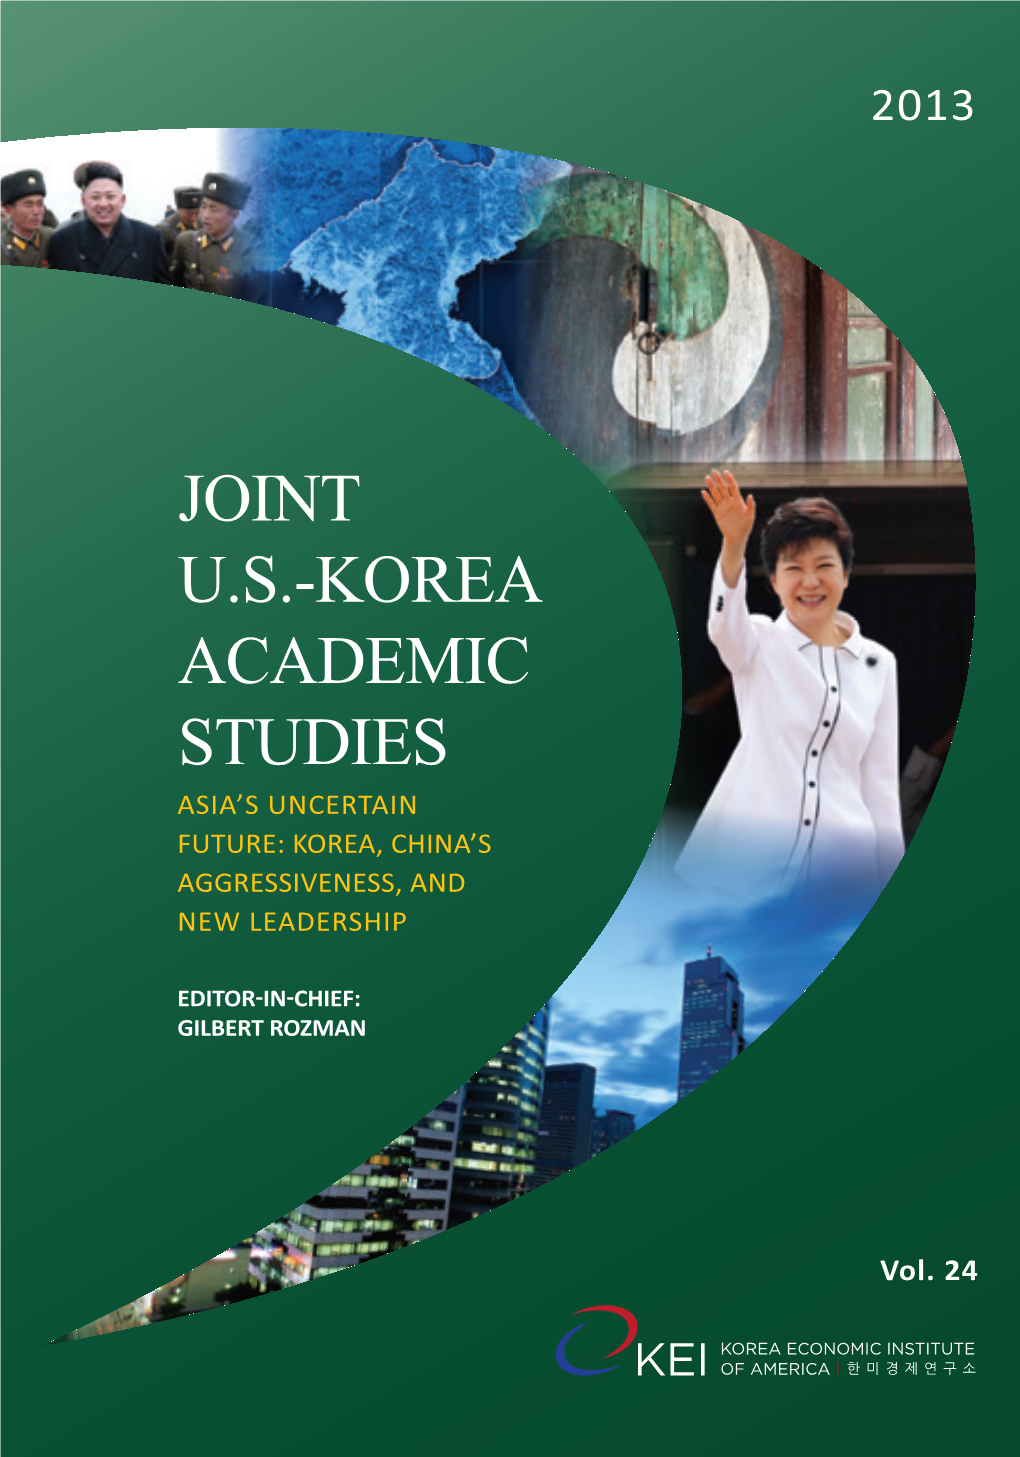 Views from Four Countries 66 | Joint U.S.-Korea Academic Studies